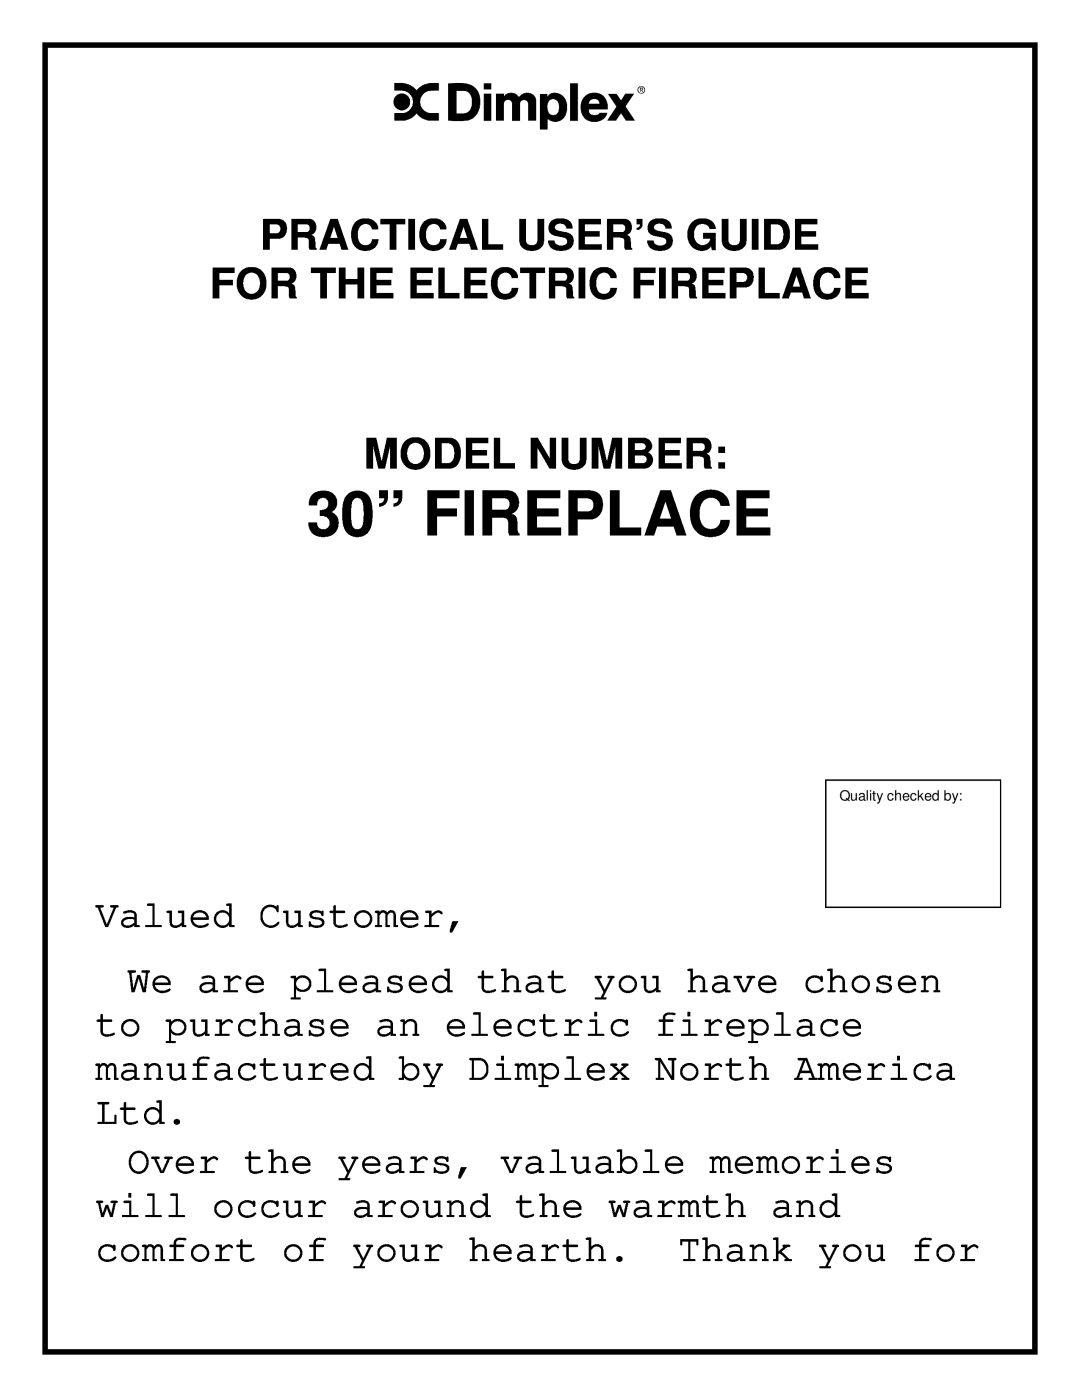 Dimplex 30" FIREPLACE manual 30” FIREPLACE, Practical User’S Guide For The Electric Fireplace, Model Number 